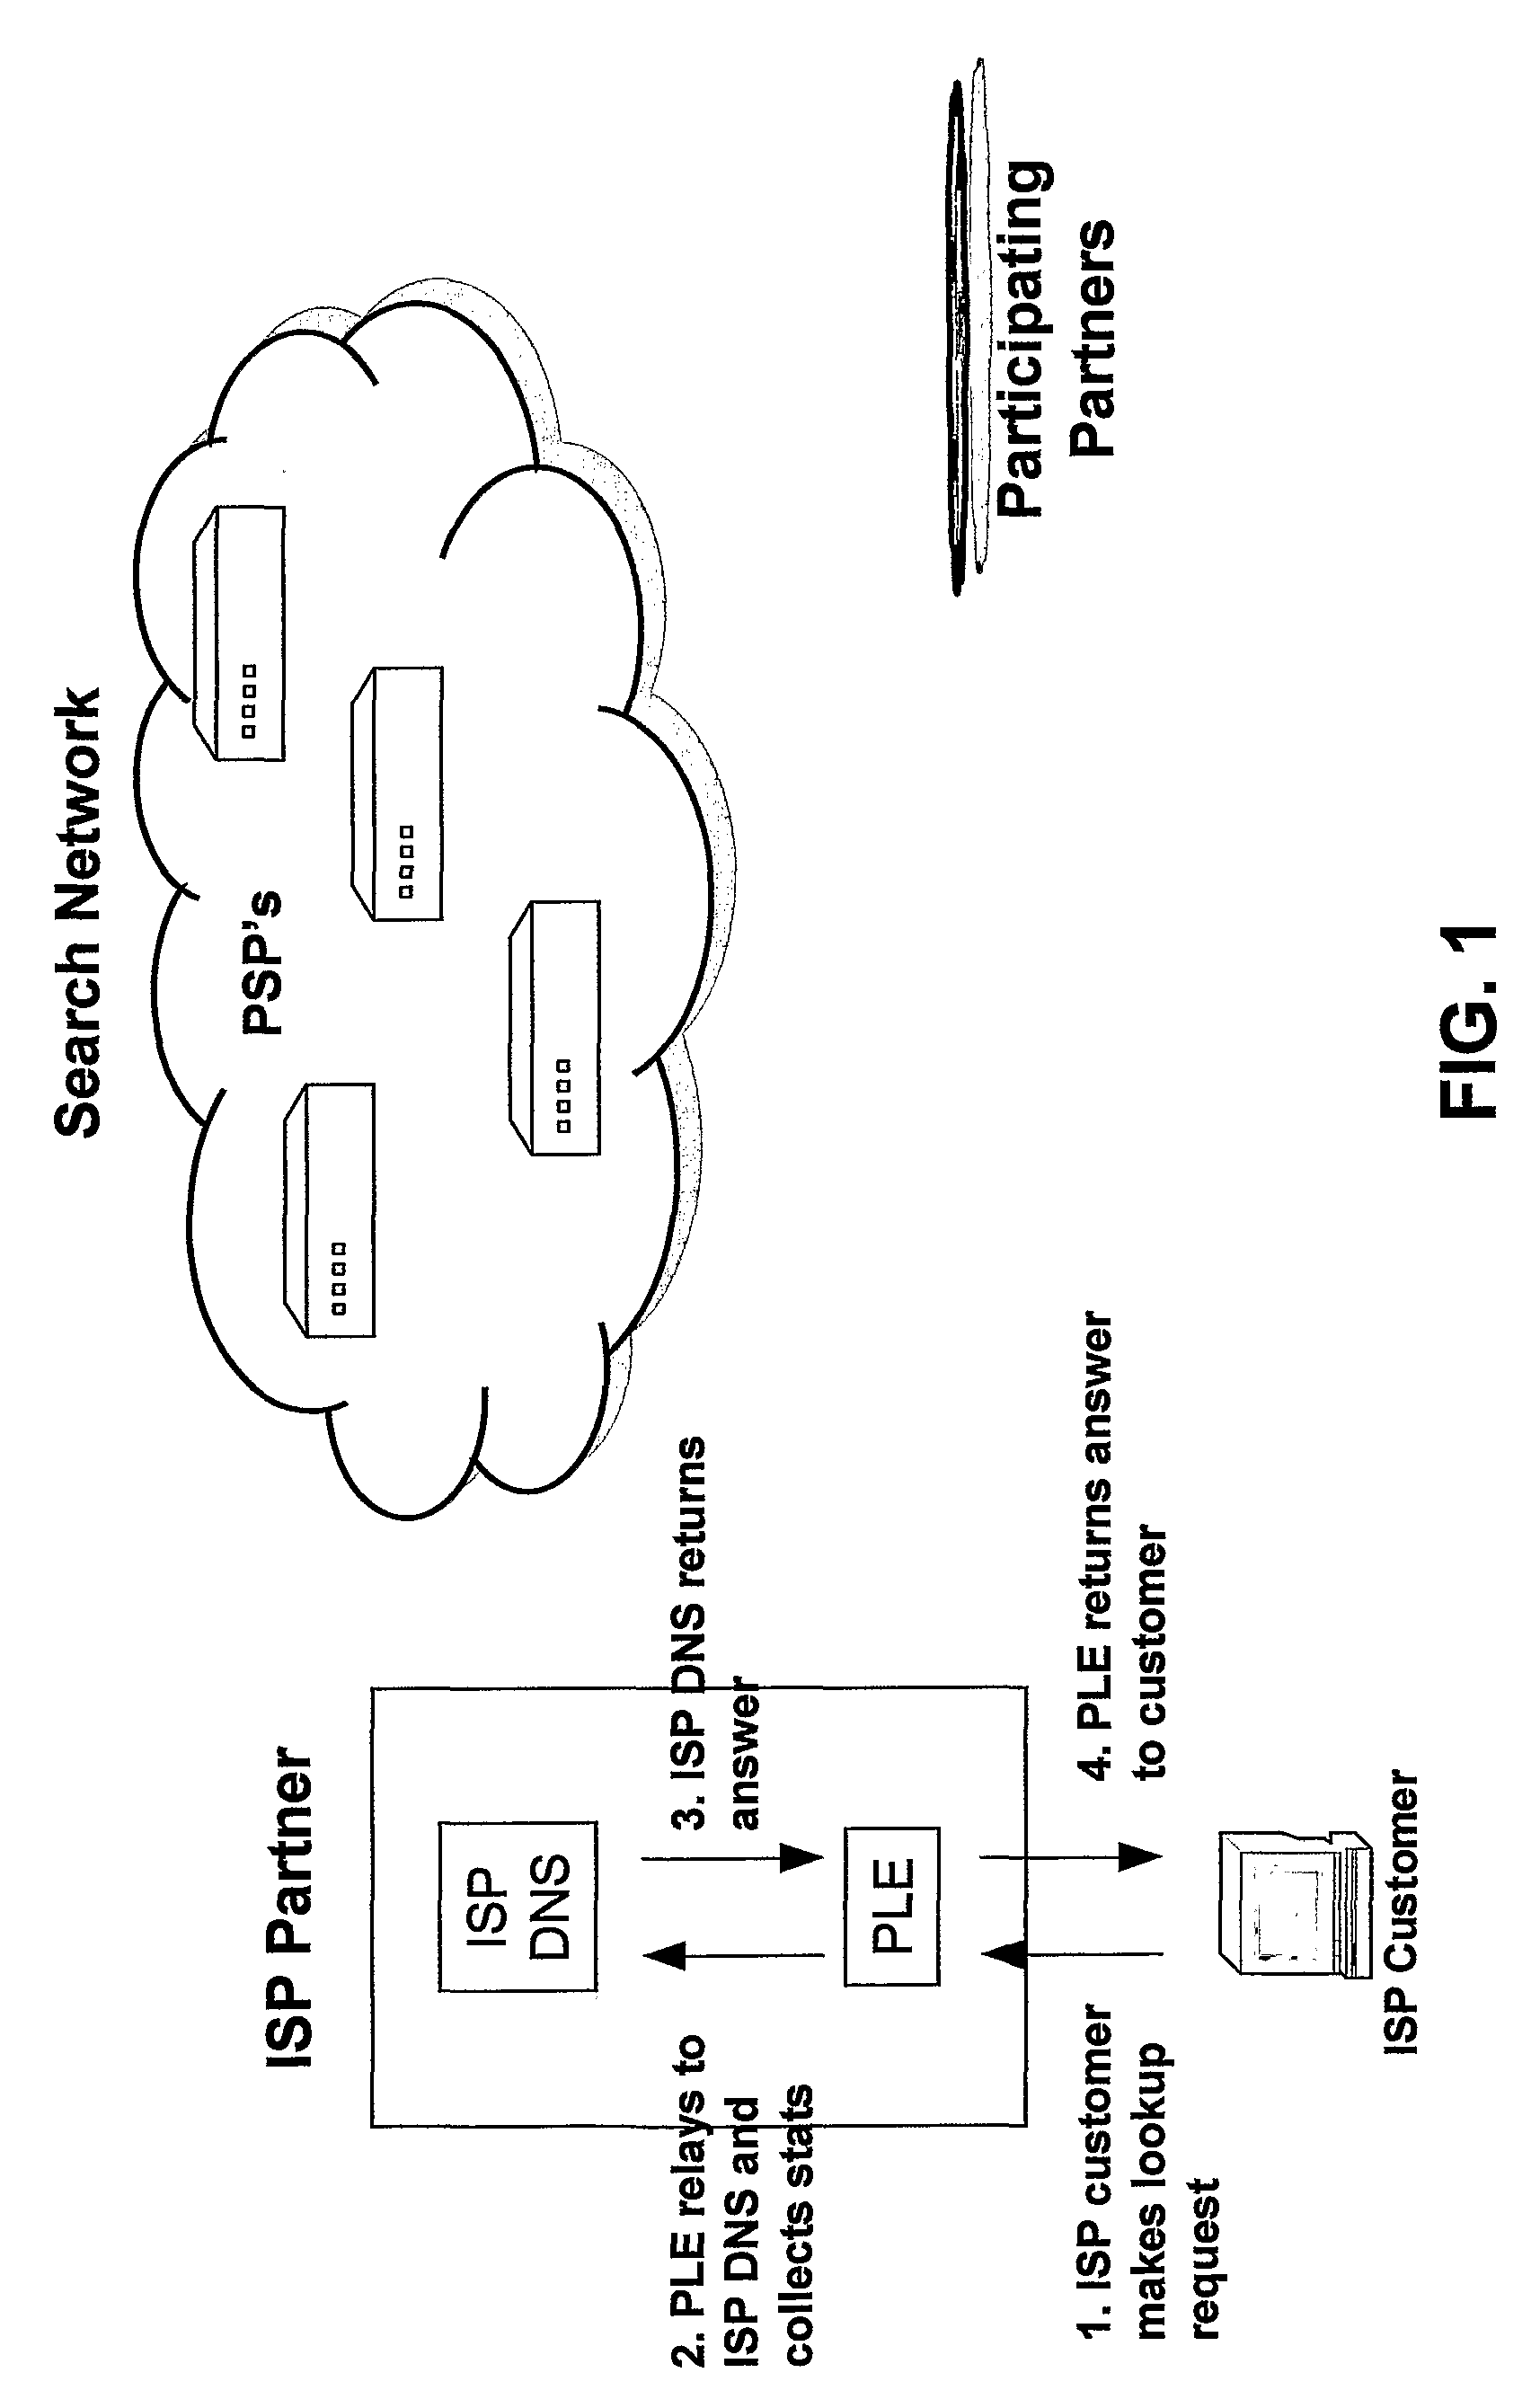 Systems and Methods for Direction of Communication Traffic